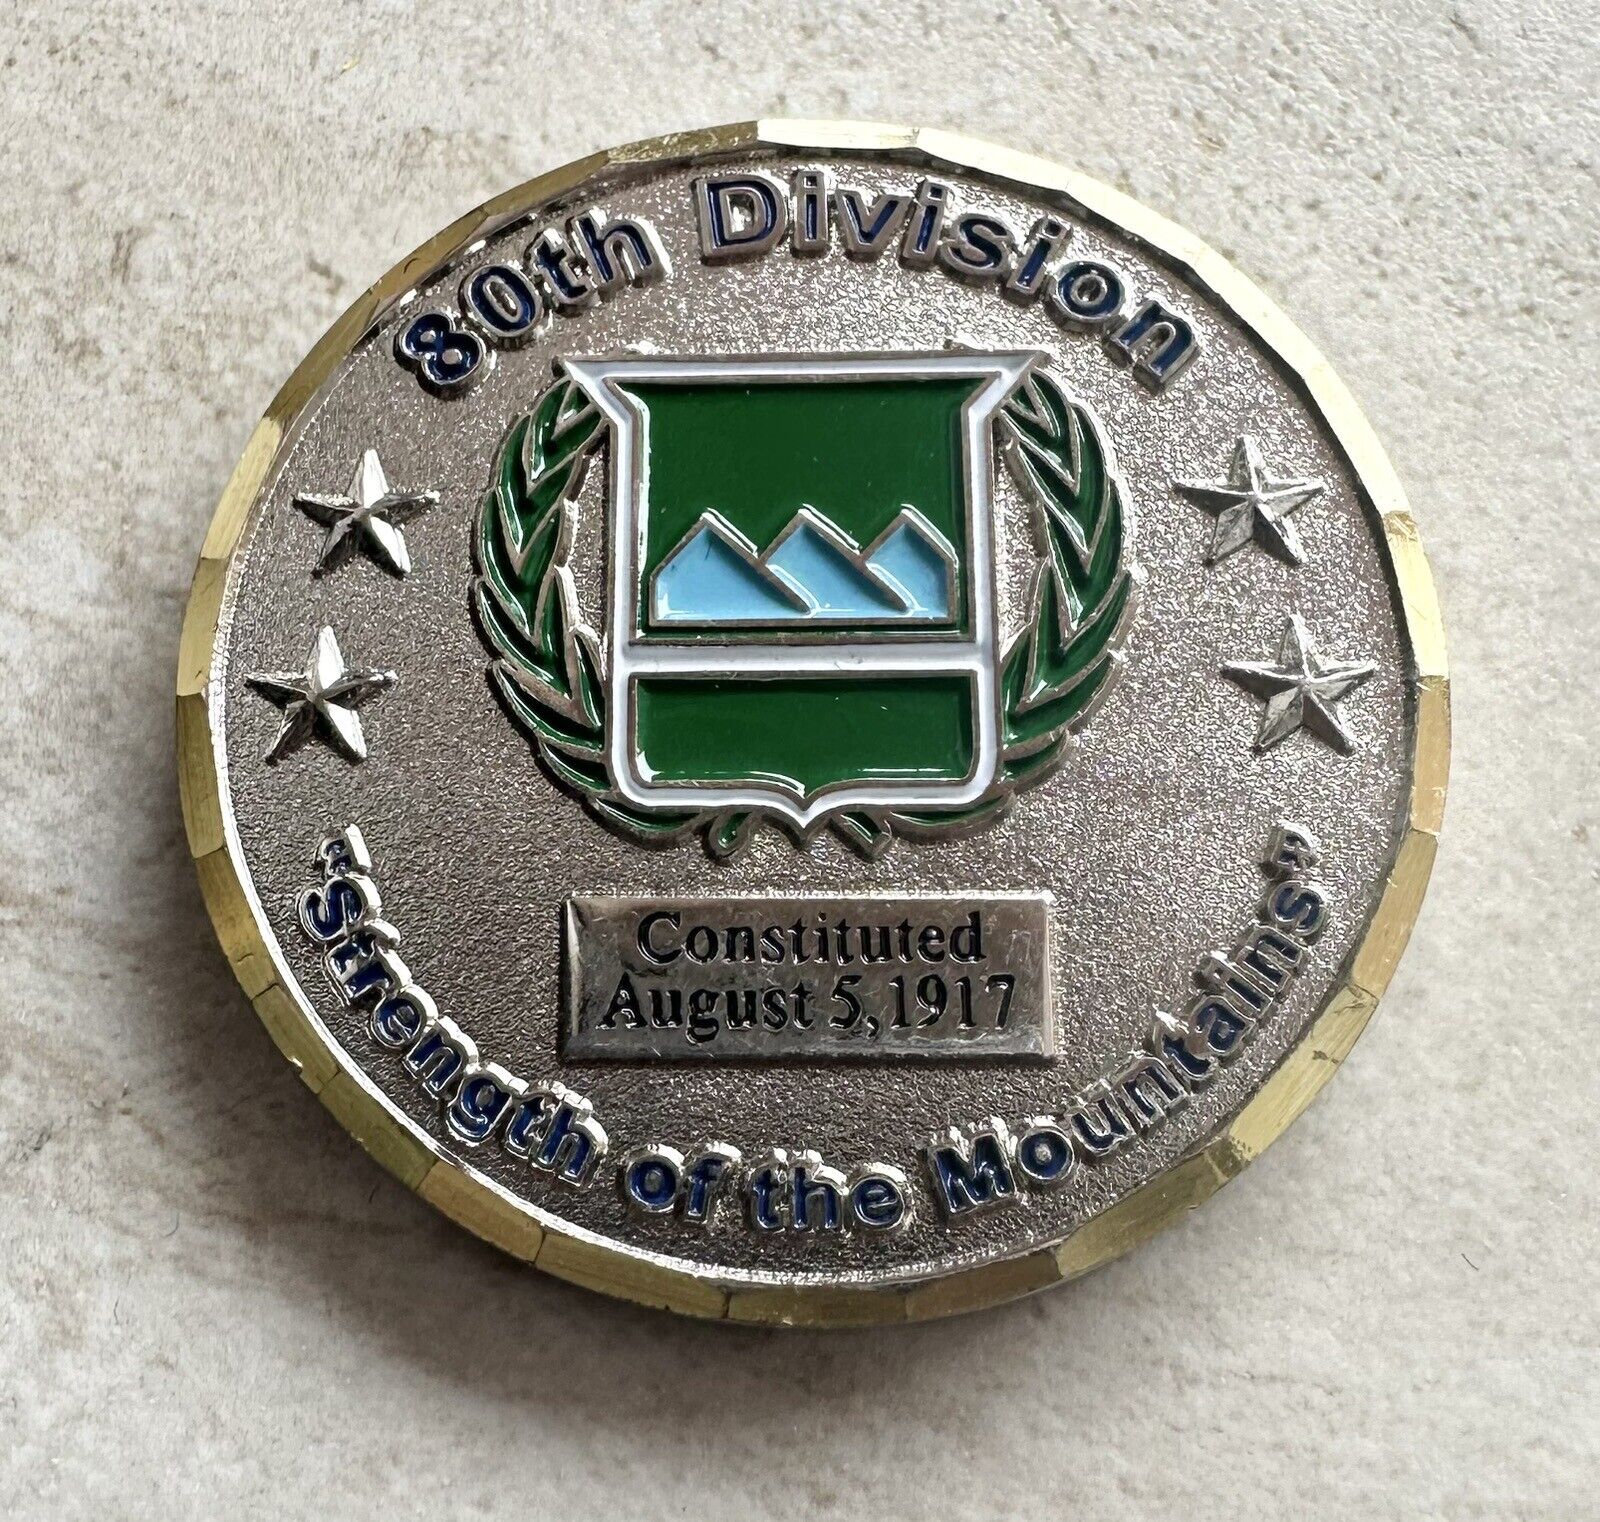 80th division (Blue Ridge Division) challenge coin from Commanding General